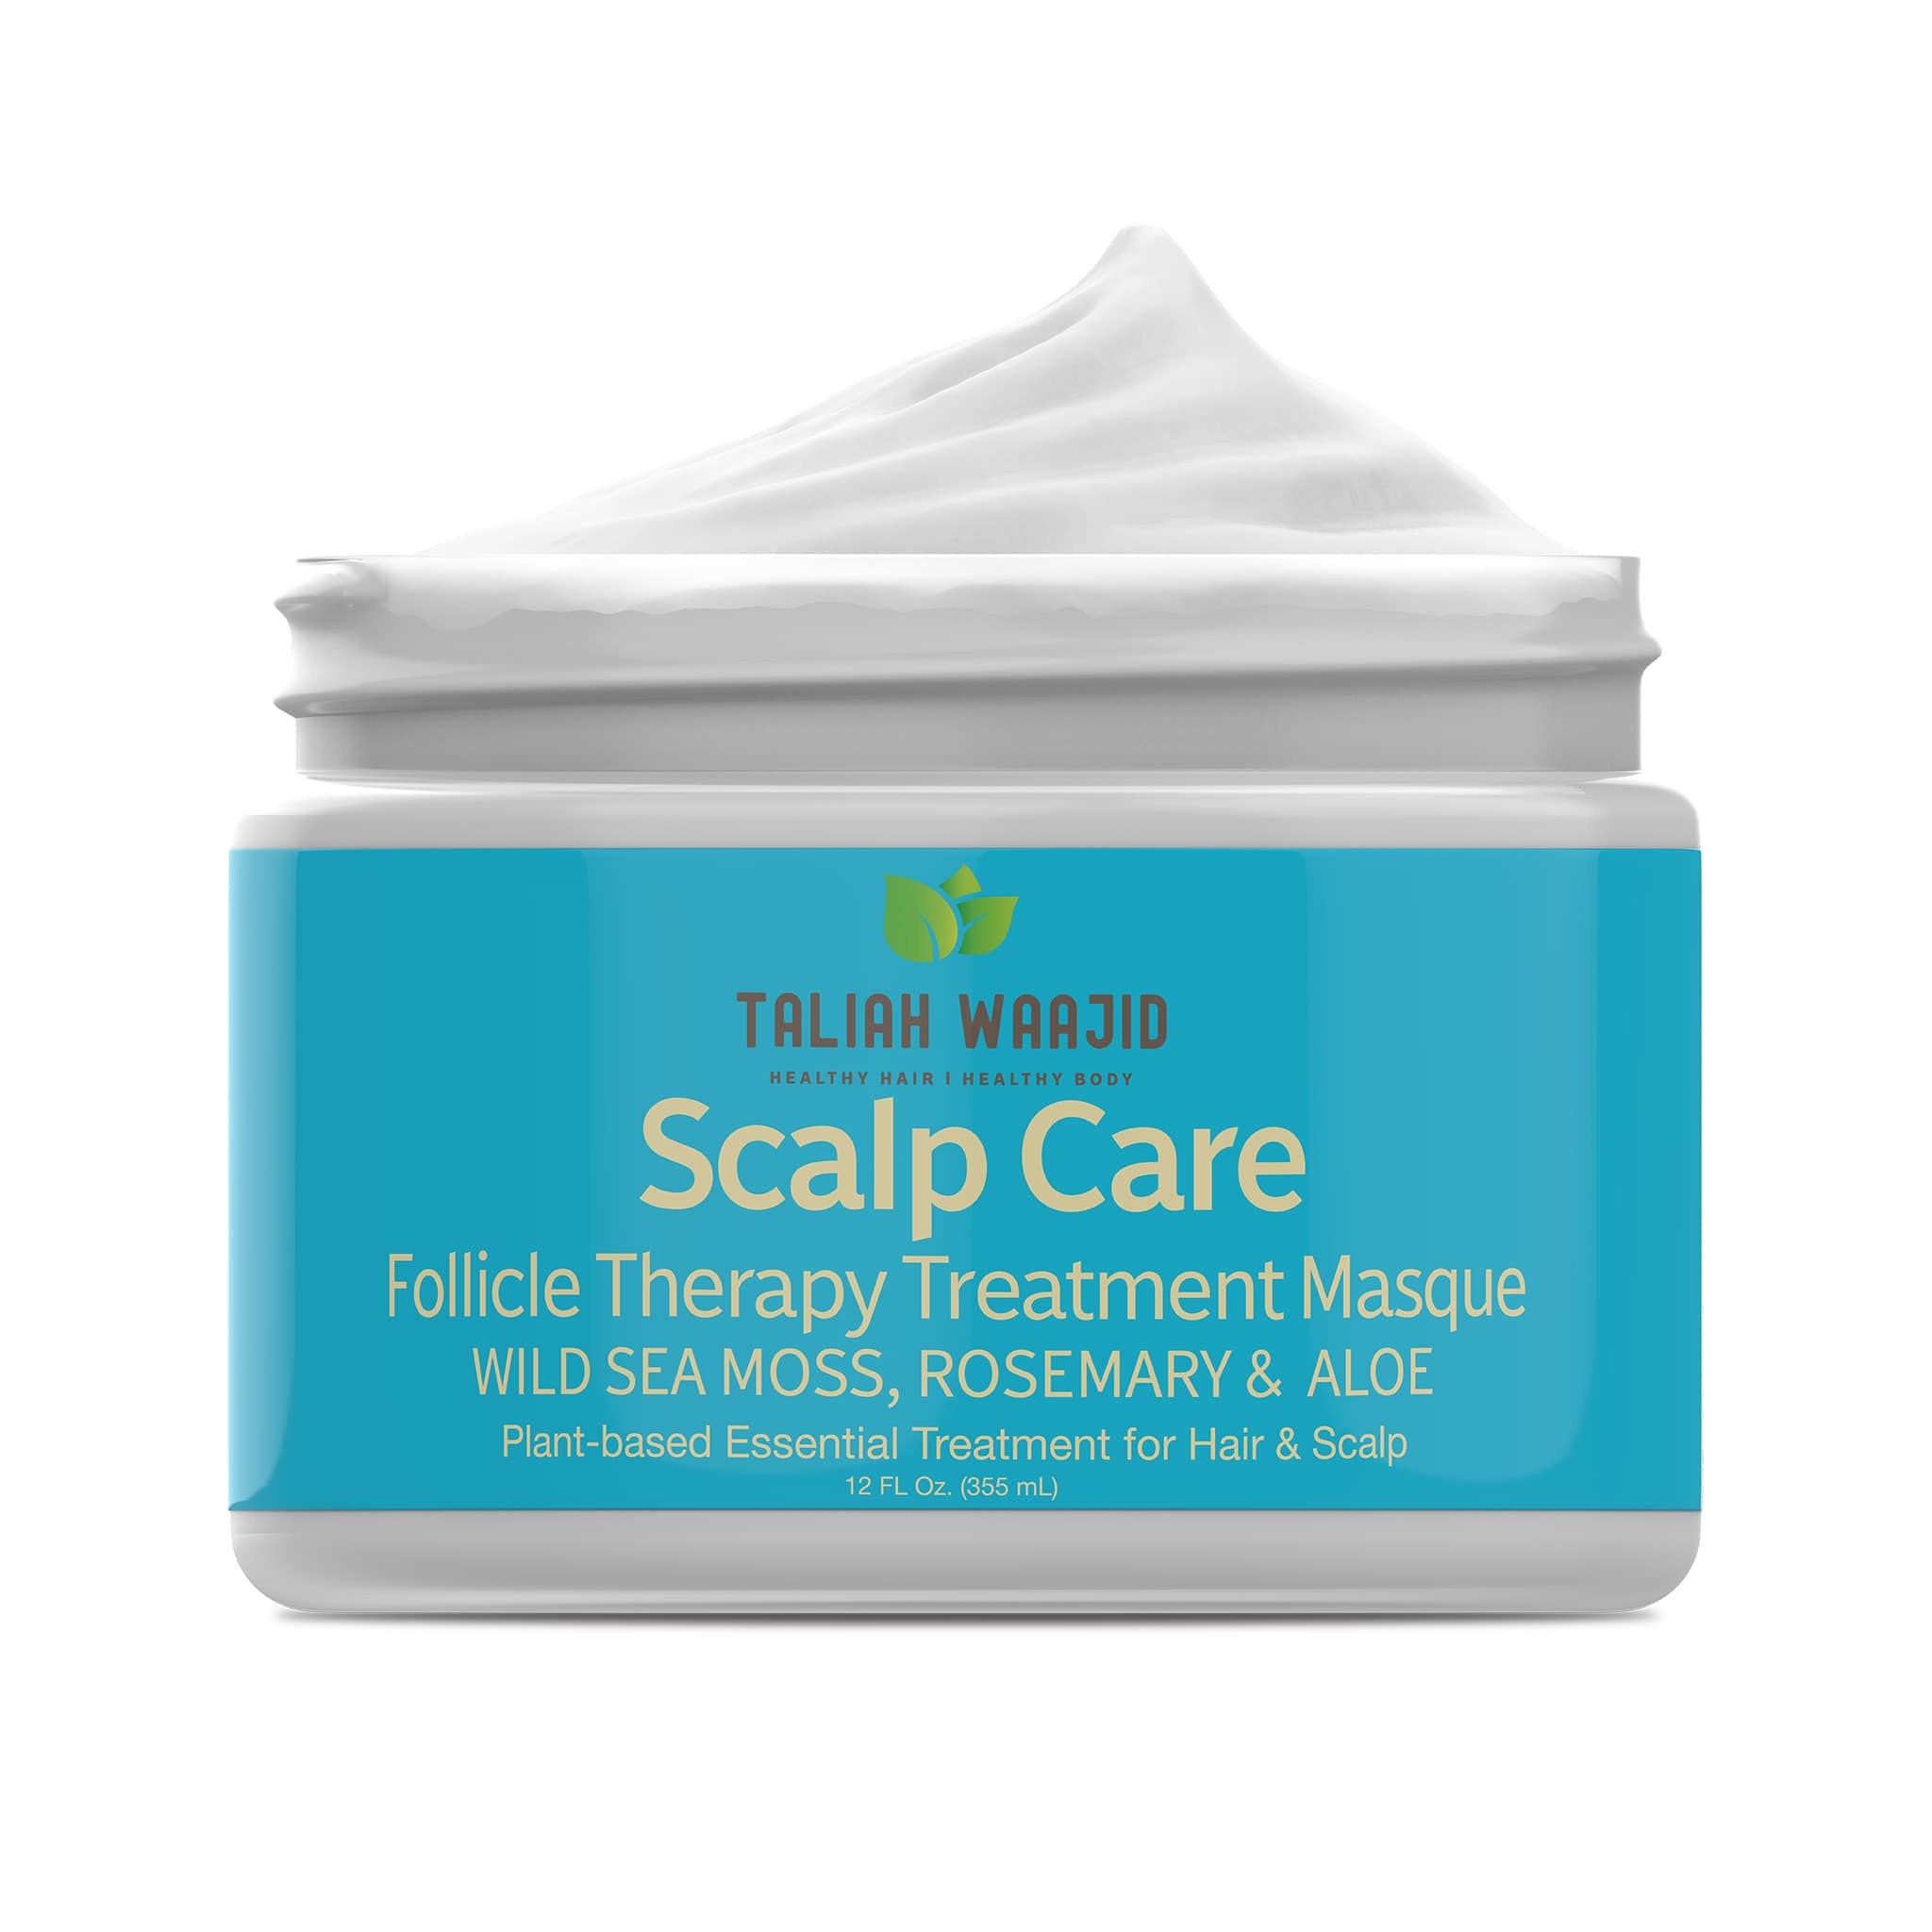 Taliah Waajid Scalp Care Follicle Therapy Treatment Masque 12oz Product showing out of jar